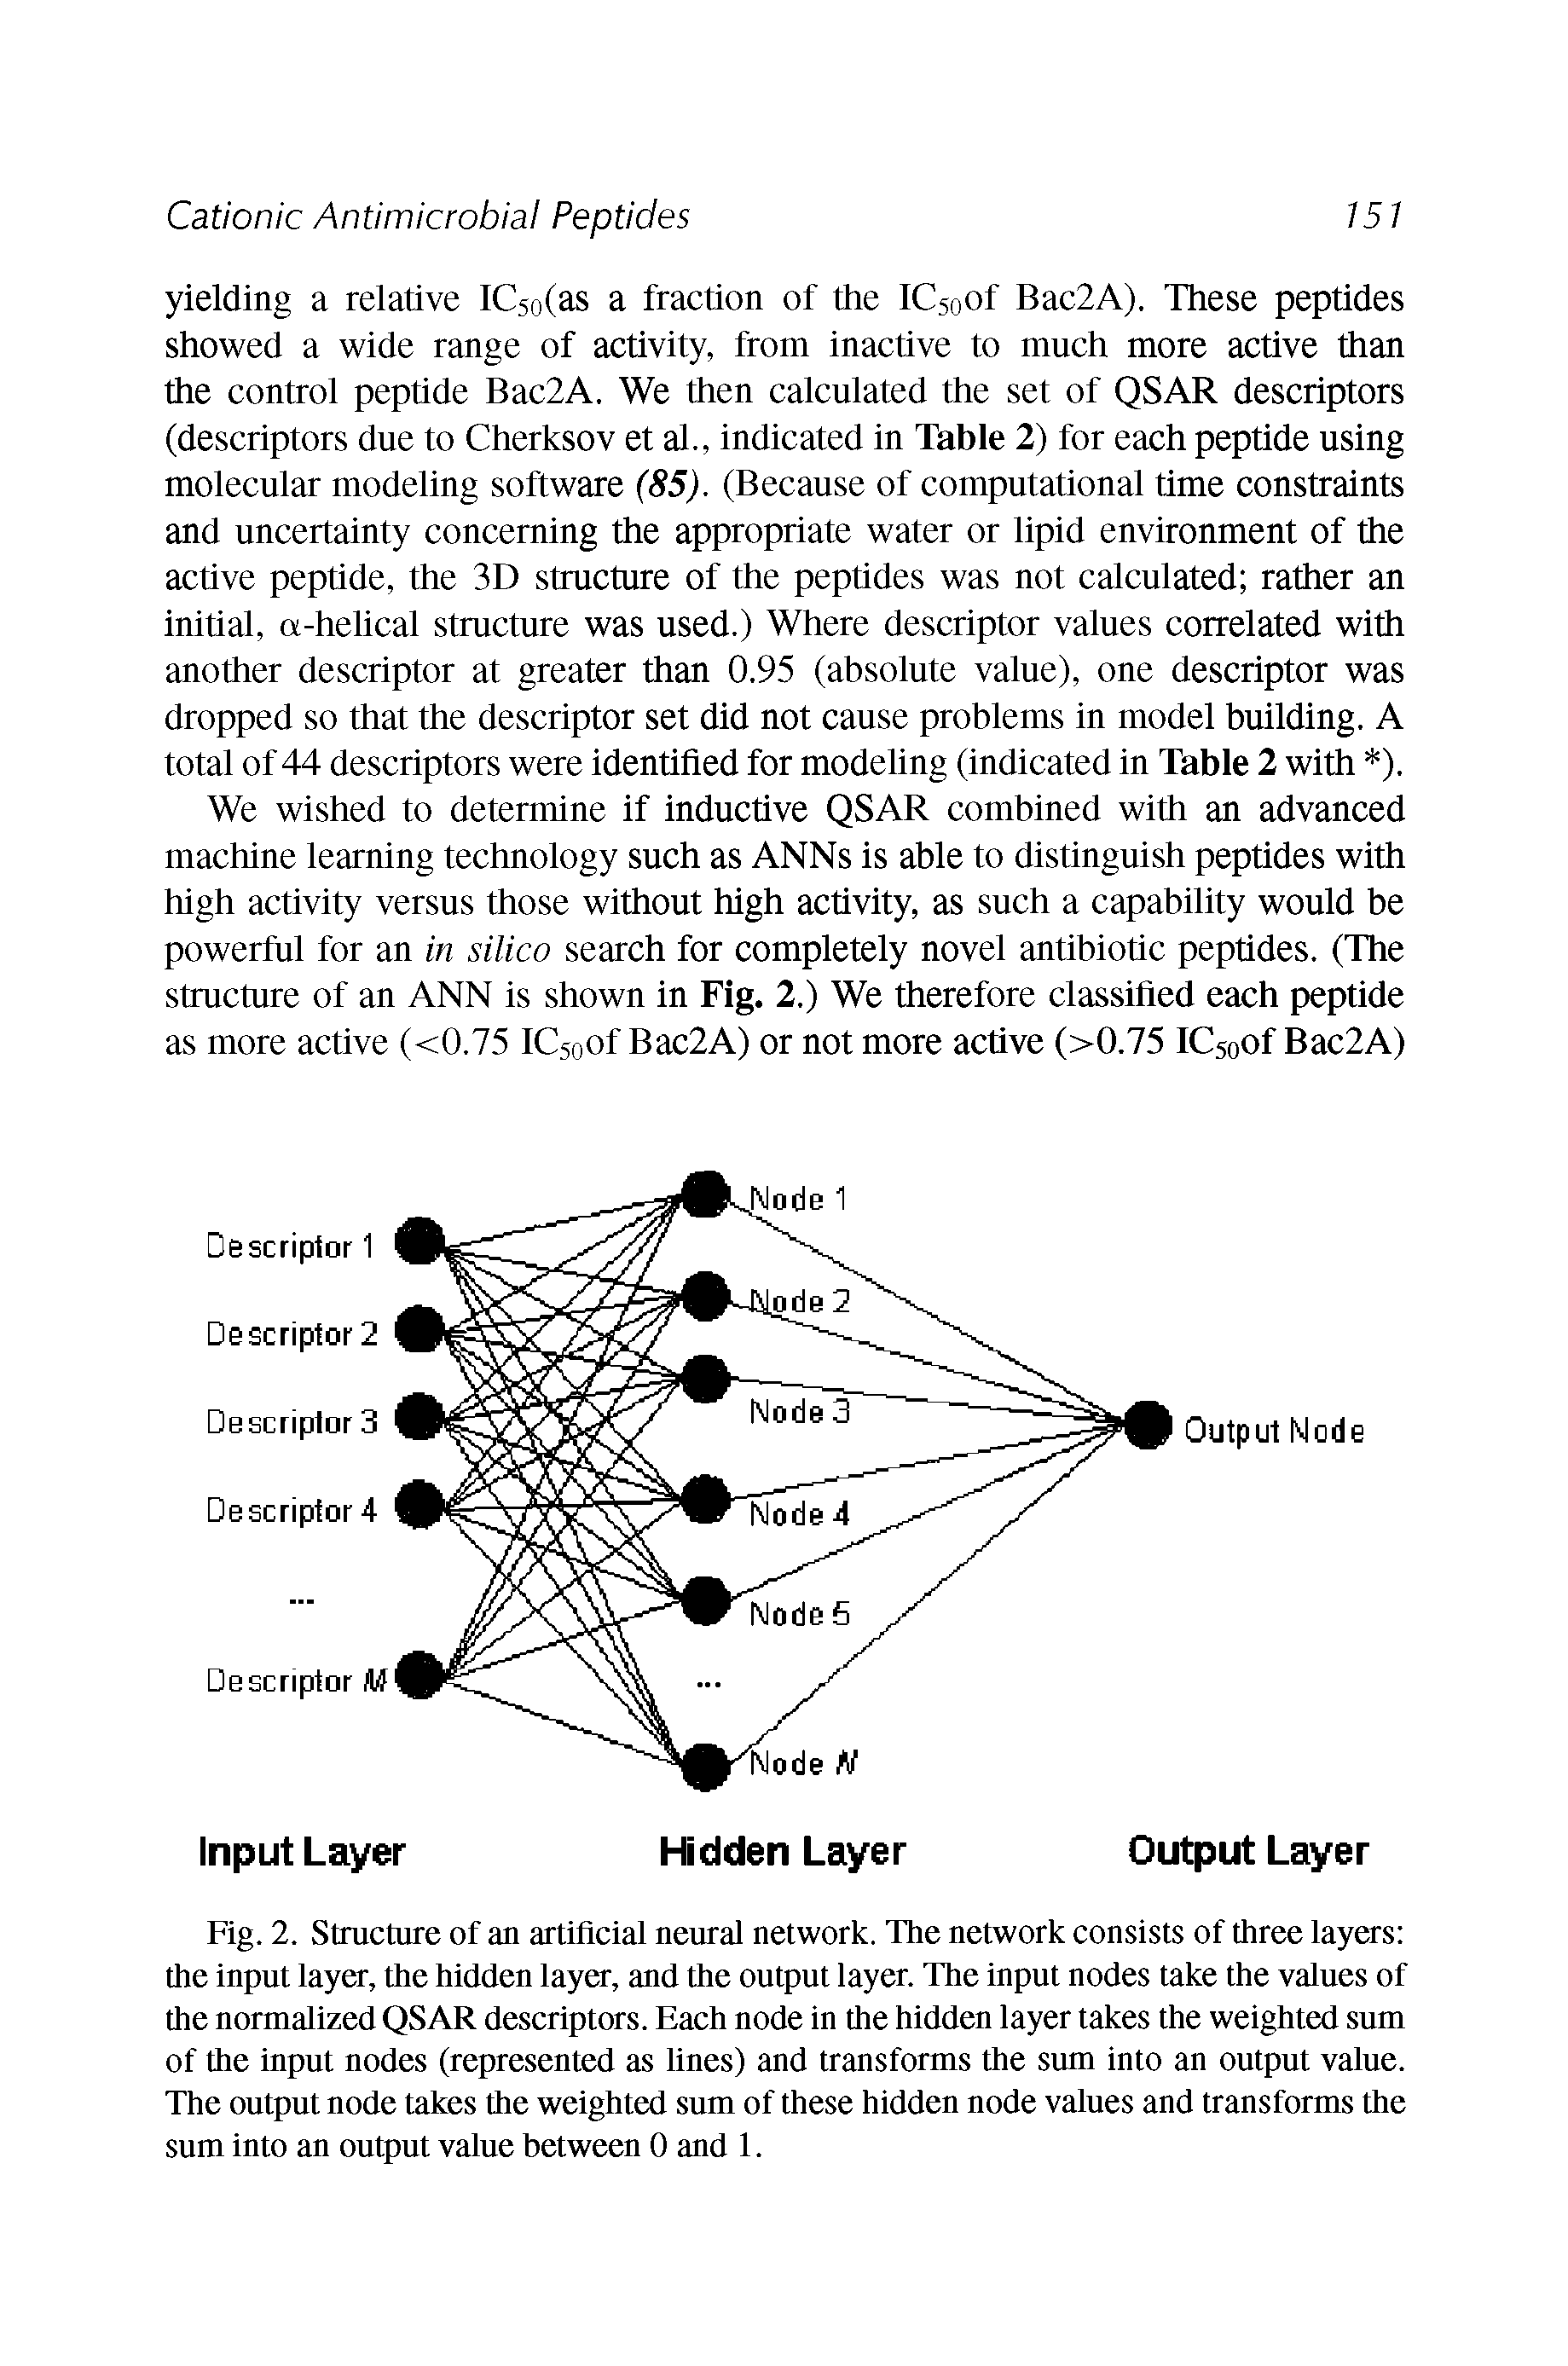 Fig. 2. Structure of an artificial neural network. The network consists of three layers the input layer, the hidden layer, and the output layer. The input nodes take the values of the normalized QSAR descriptors. Each node in the hidden layer takes the weighted sum of the input nodes (represented as lines) and transforms the sum into an output value. The output node takes the weighted sum of these hidden node values and transforms the sum into an output value between 0 and 1.